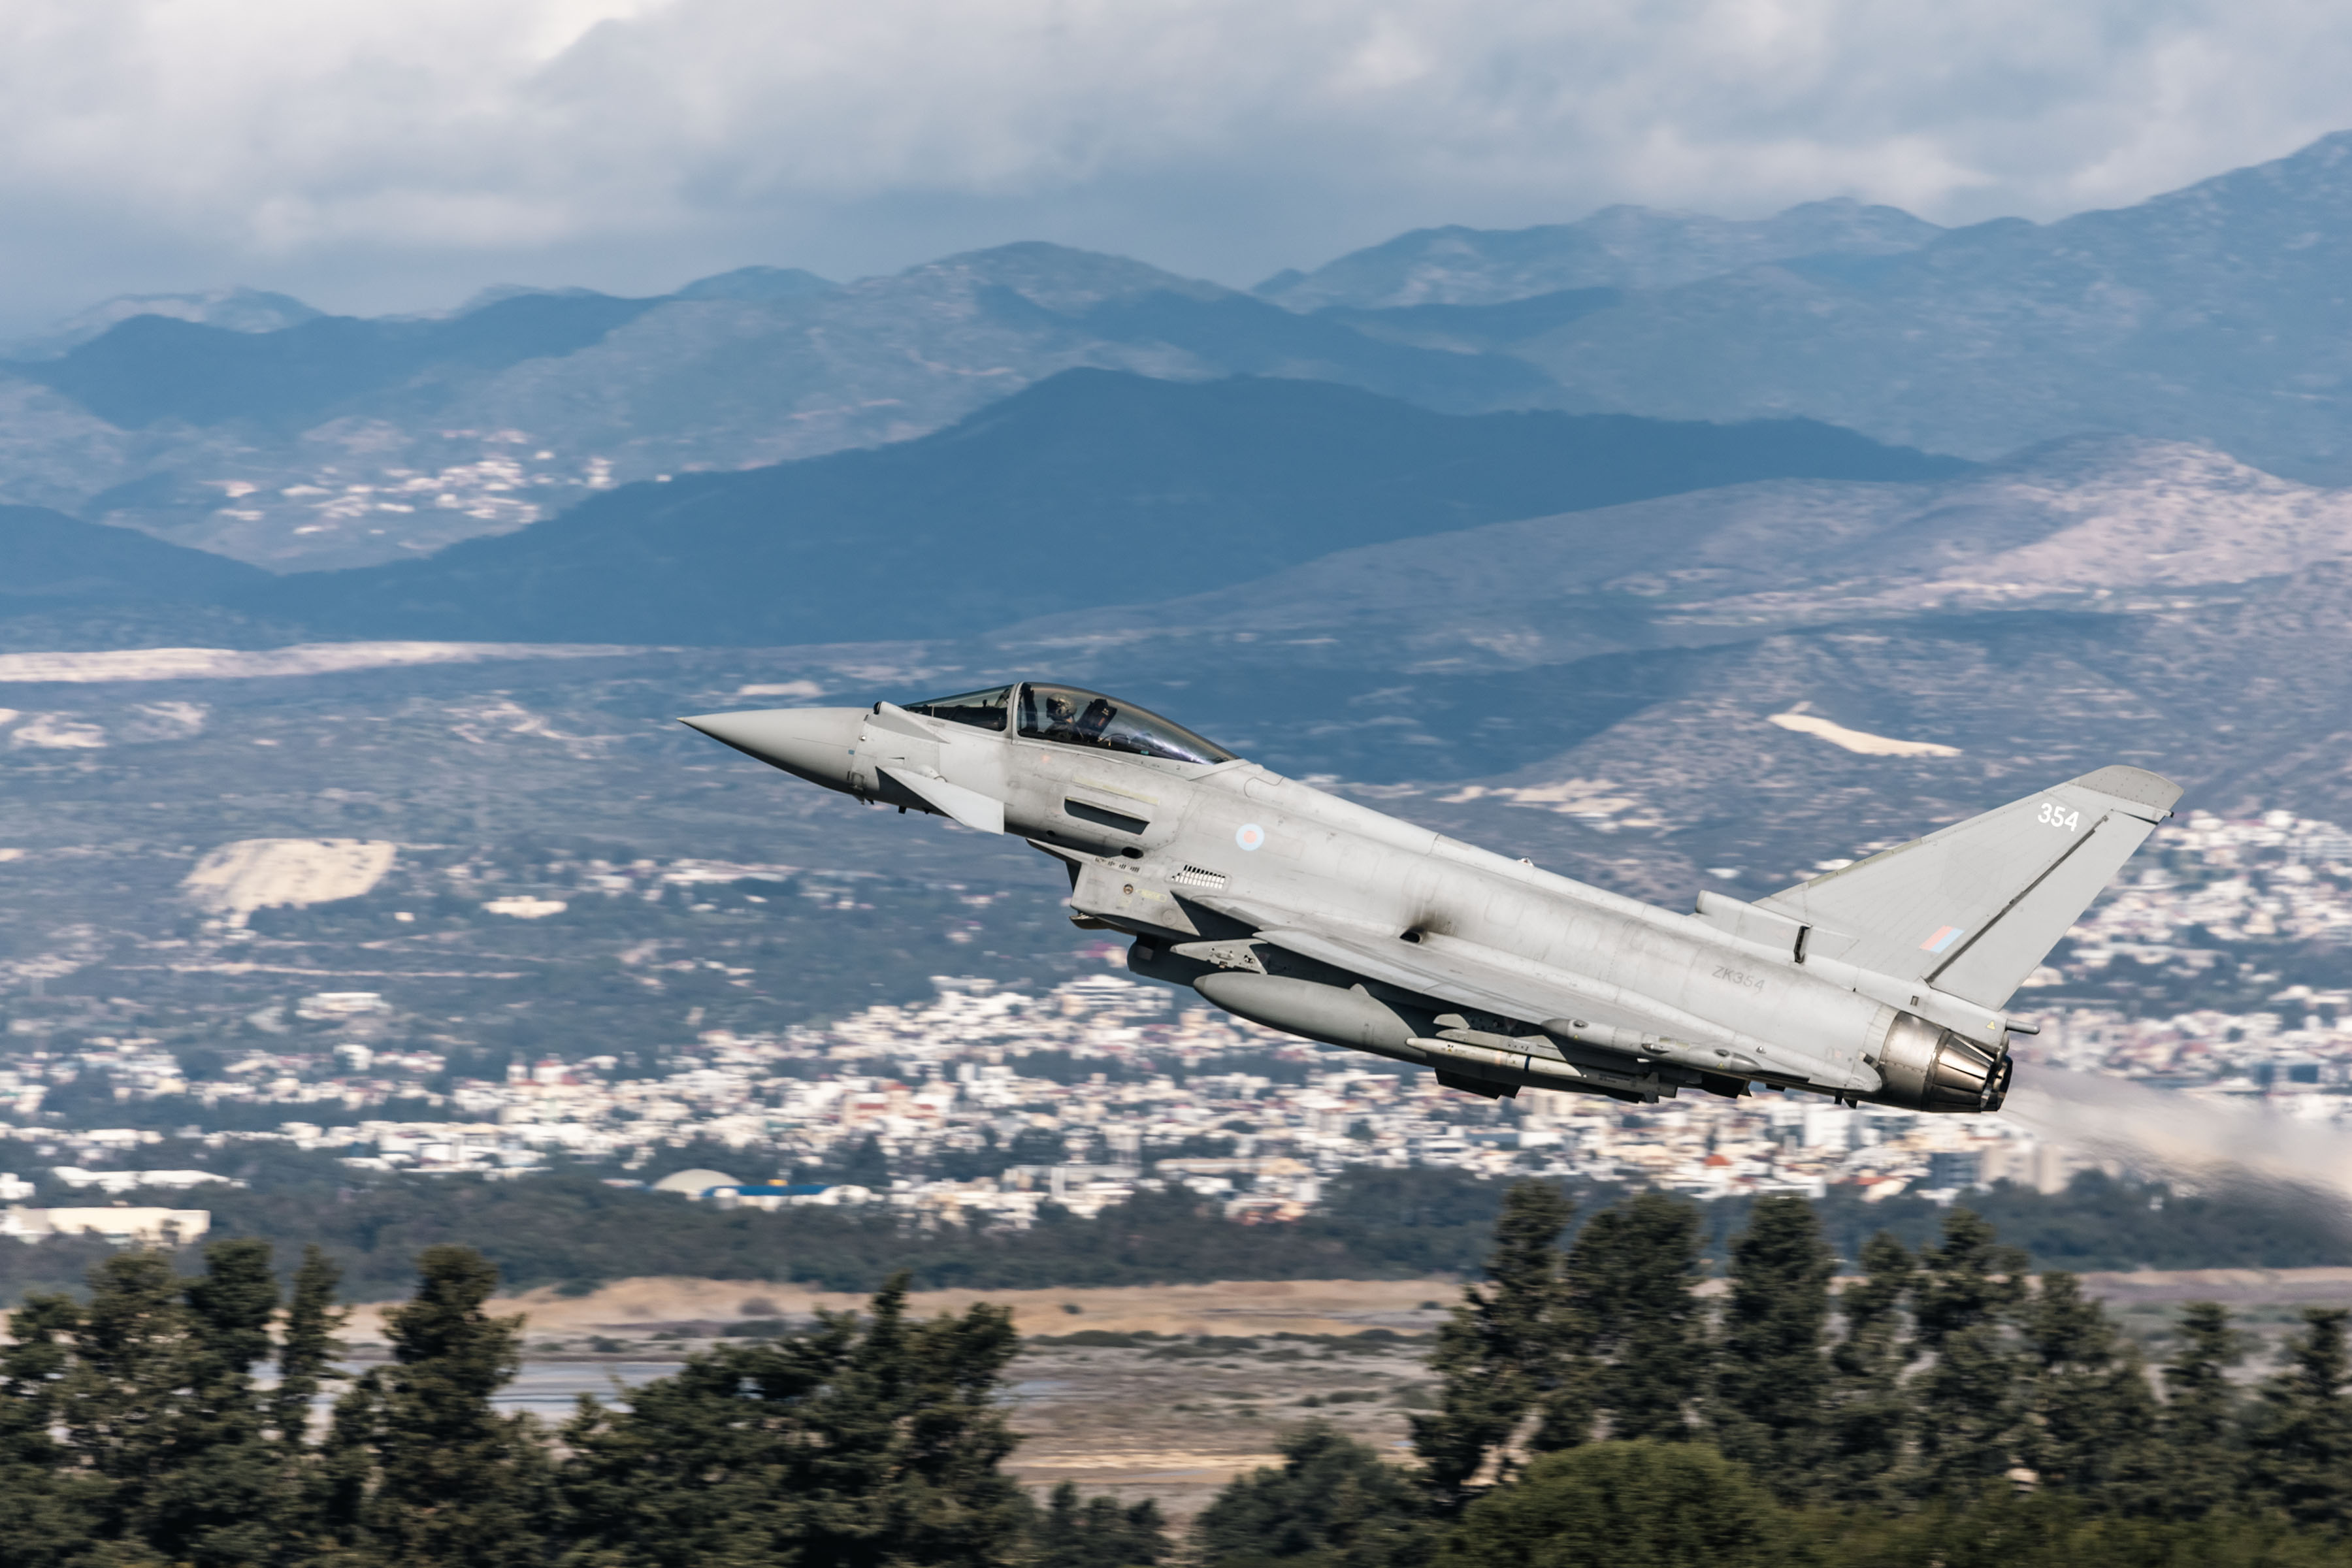 Typhoon taking off with mountains in the background